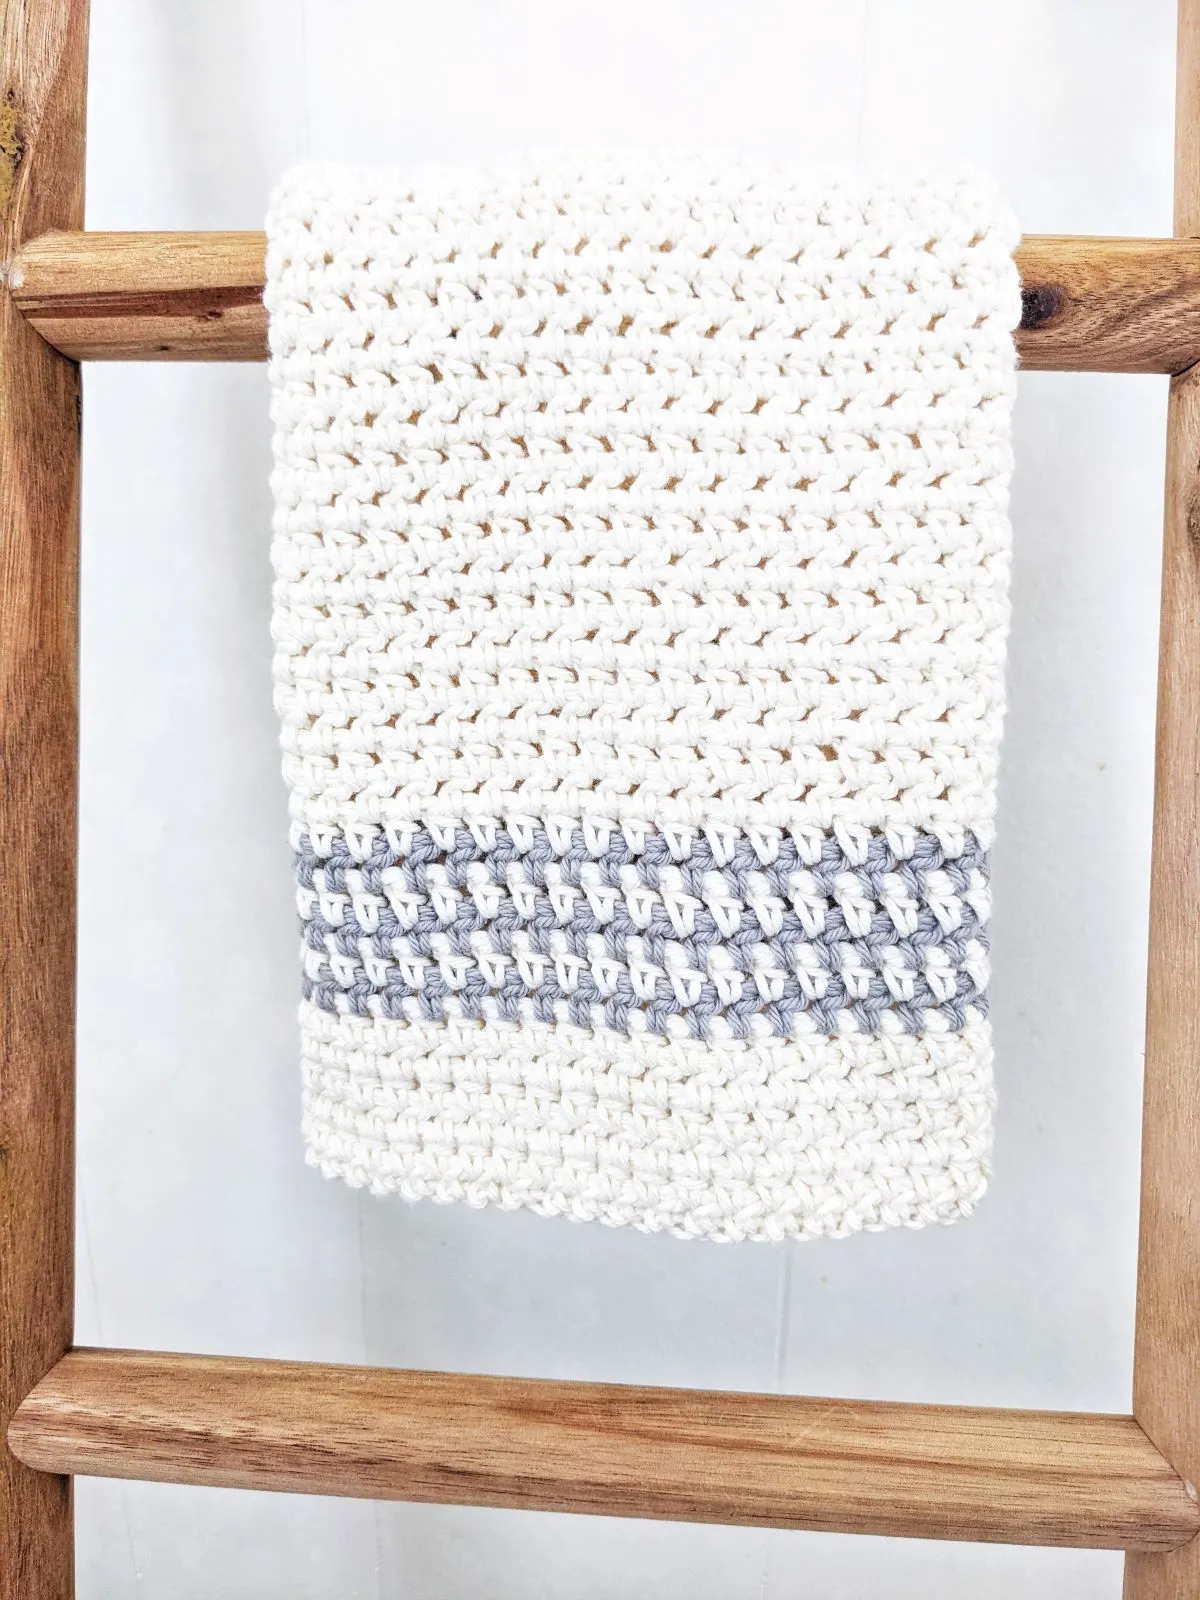 Photo shows a hand towel on a decorative ladder.